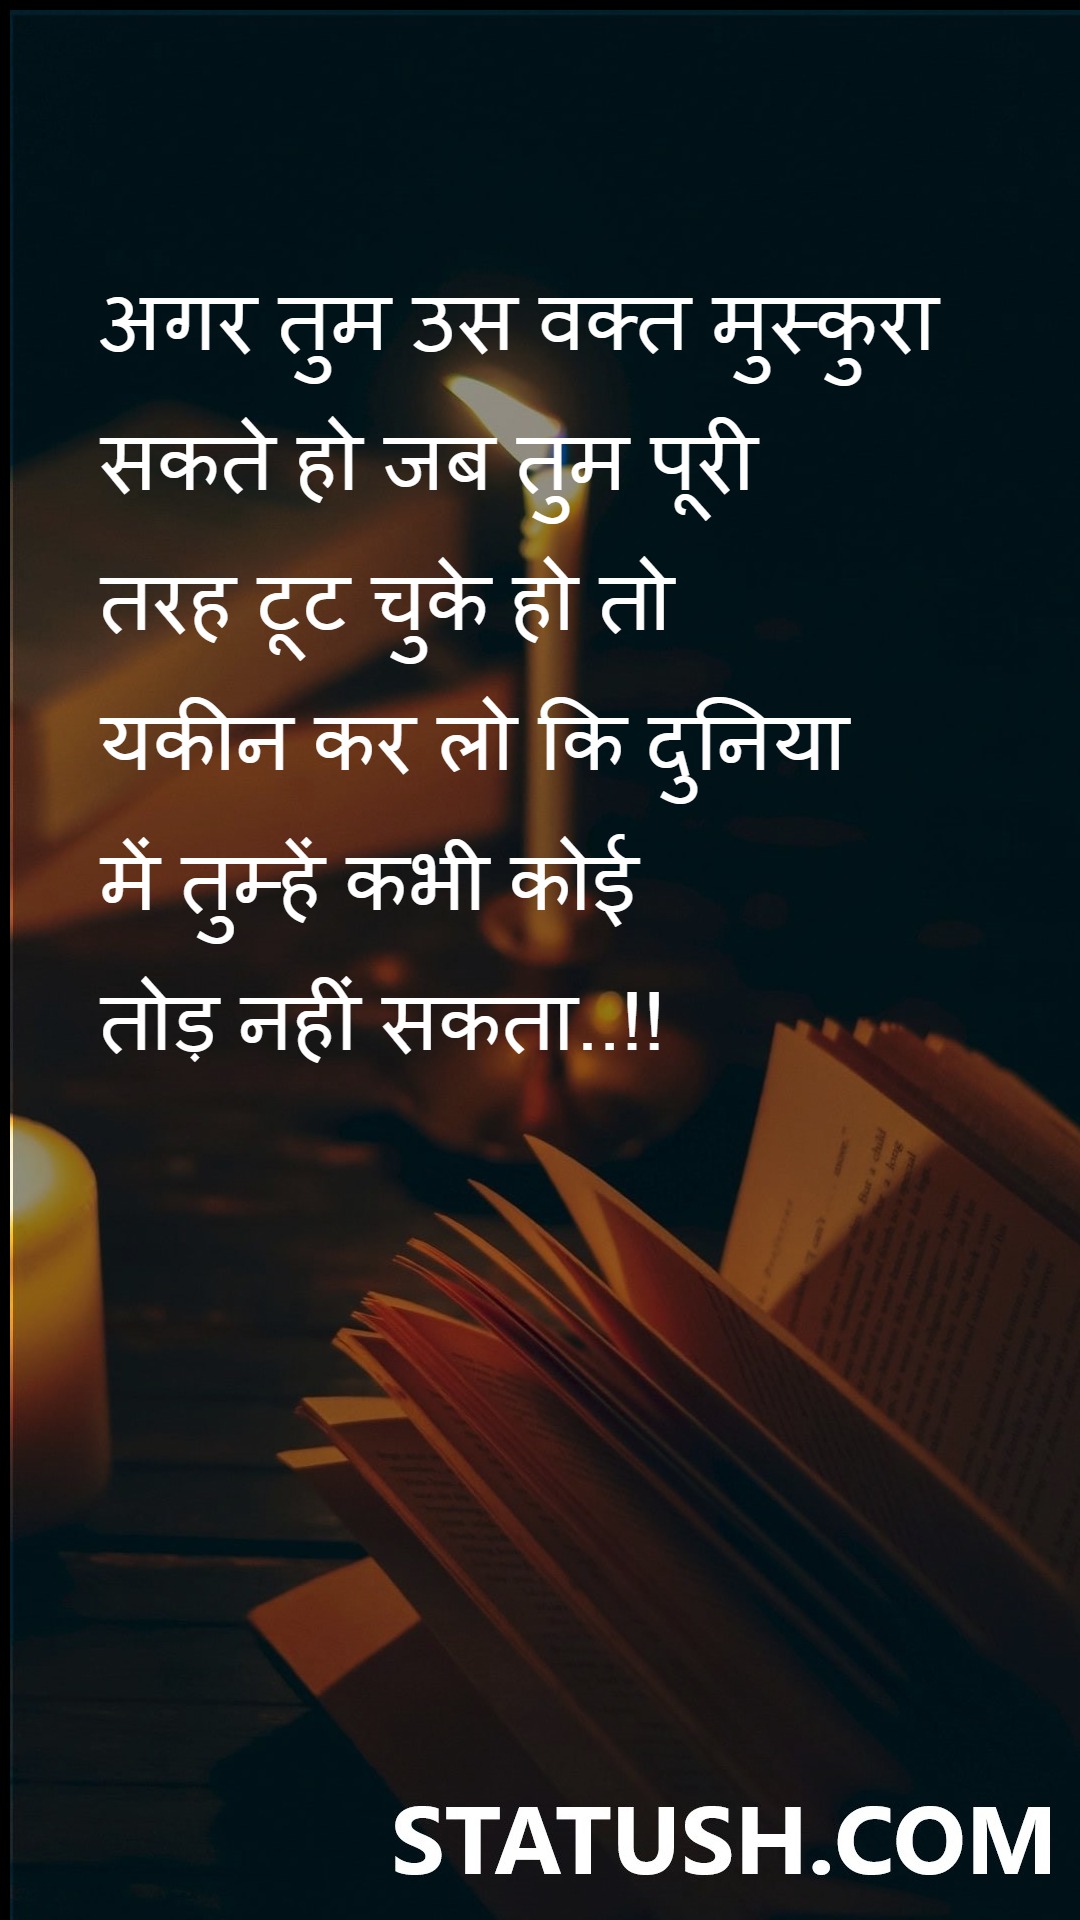 If you can smile when you are completely broken Hindi Quotes at statush.com